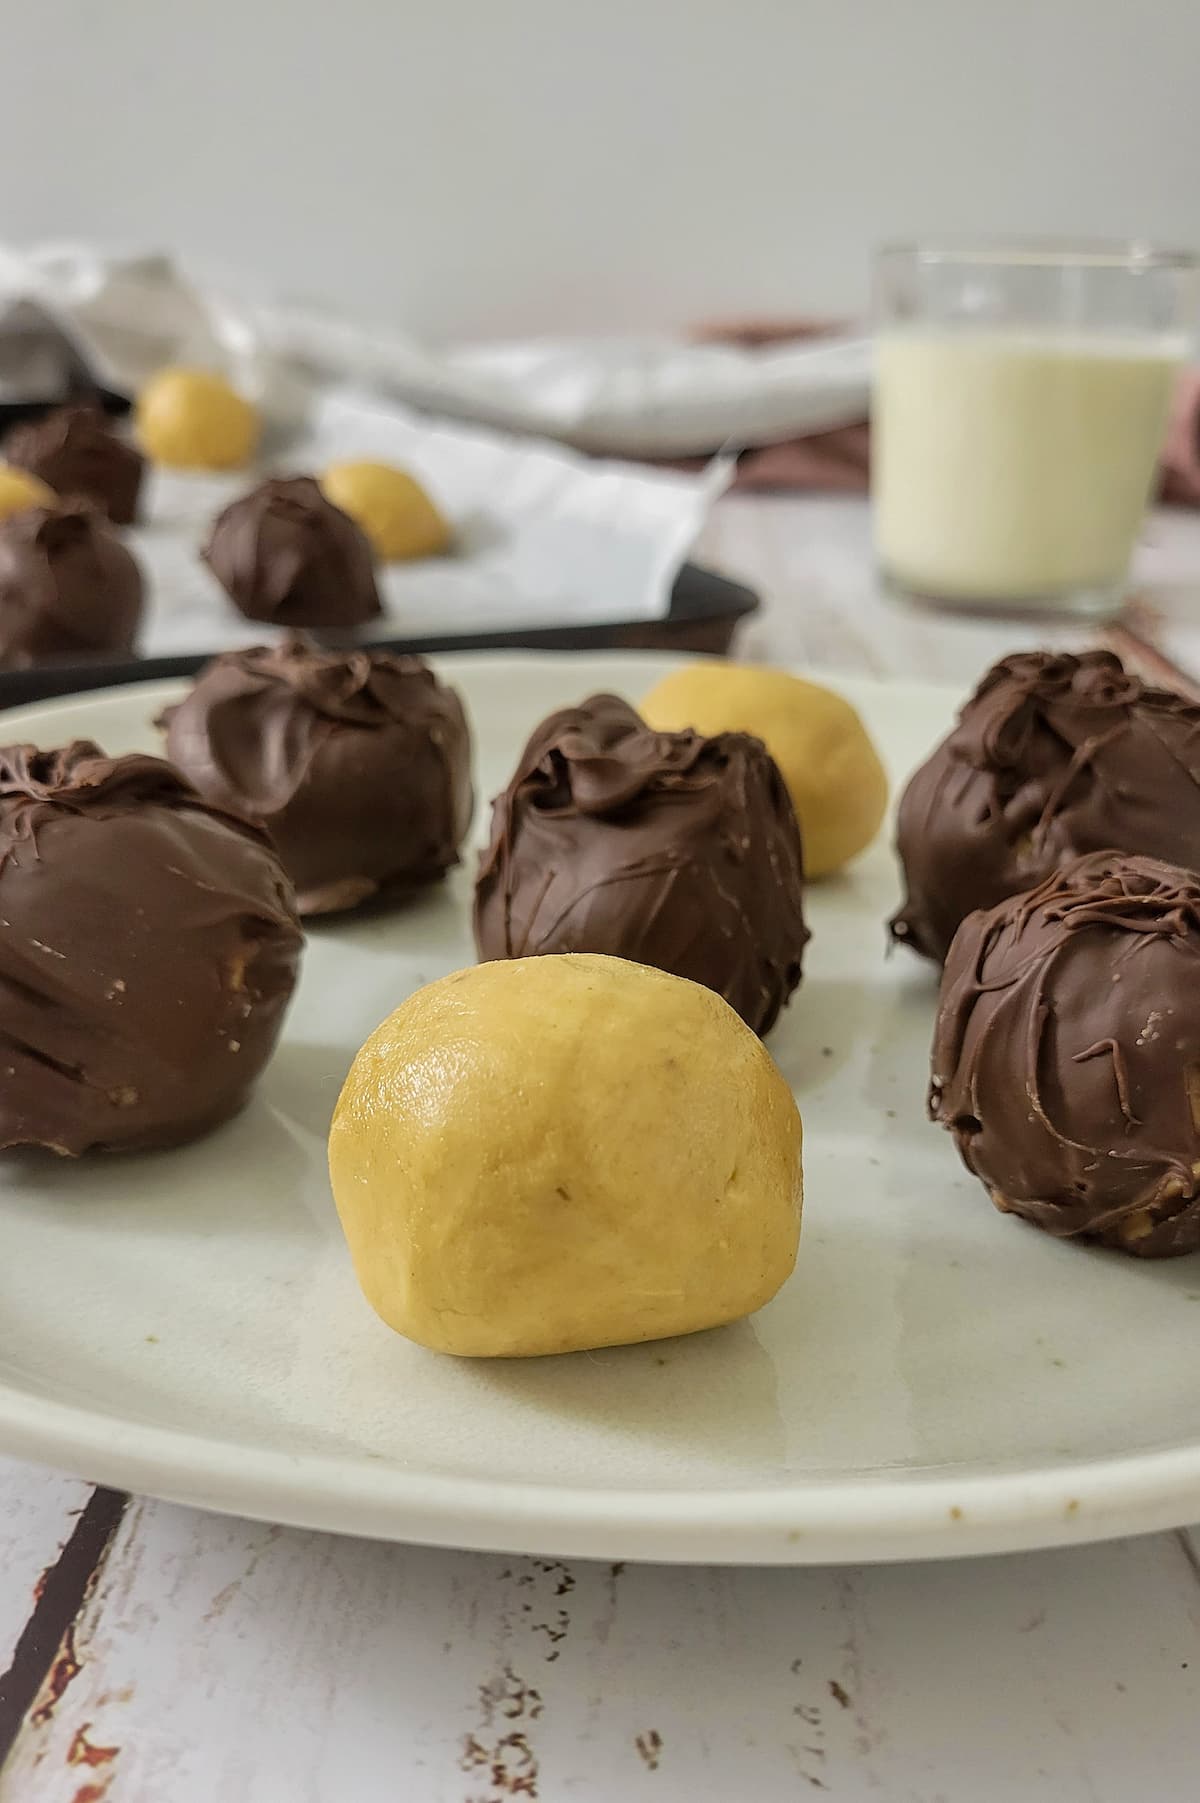 peanut butter balls on a plate and baking sheet, some covered in chocolate and some not, glass of milk in the background